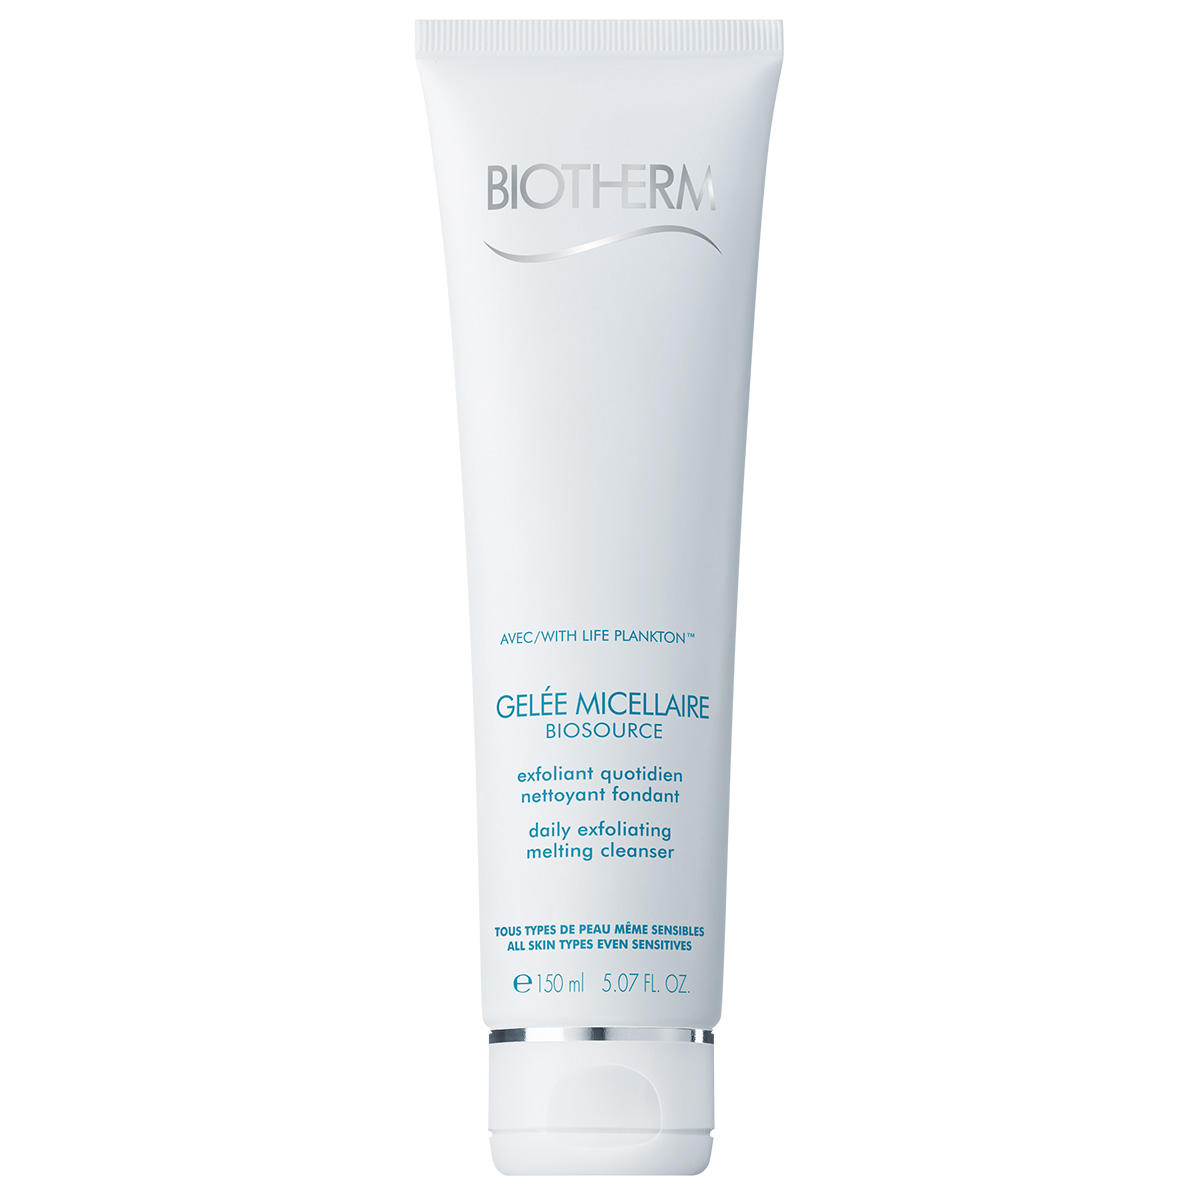 Biotherm Biosource Gelée Micellaire Daily Exfoliating Melting Cleanser 150 ml - 1